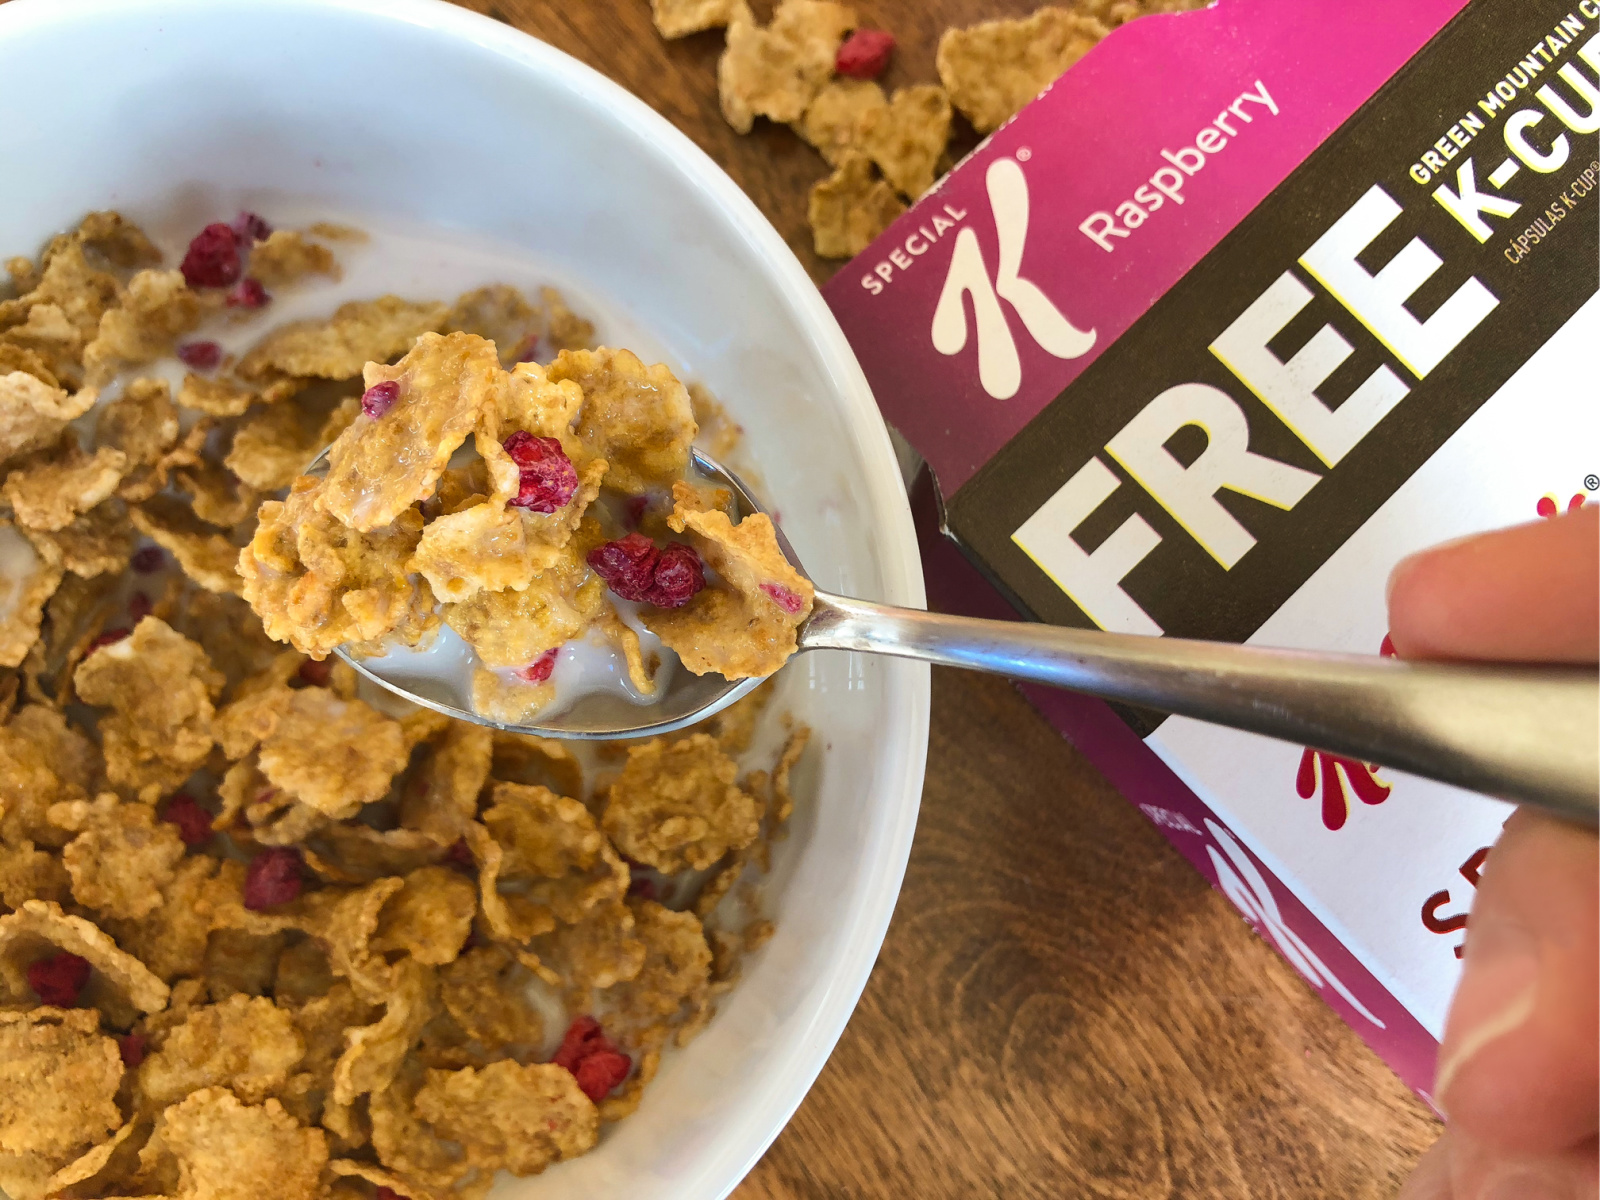 Still Time To Grab Great Taste - Kellogg’s® Special K® Cereals Are Buy One, Get One FREE At Publix on I Heart Publix 1